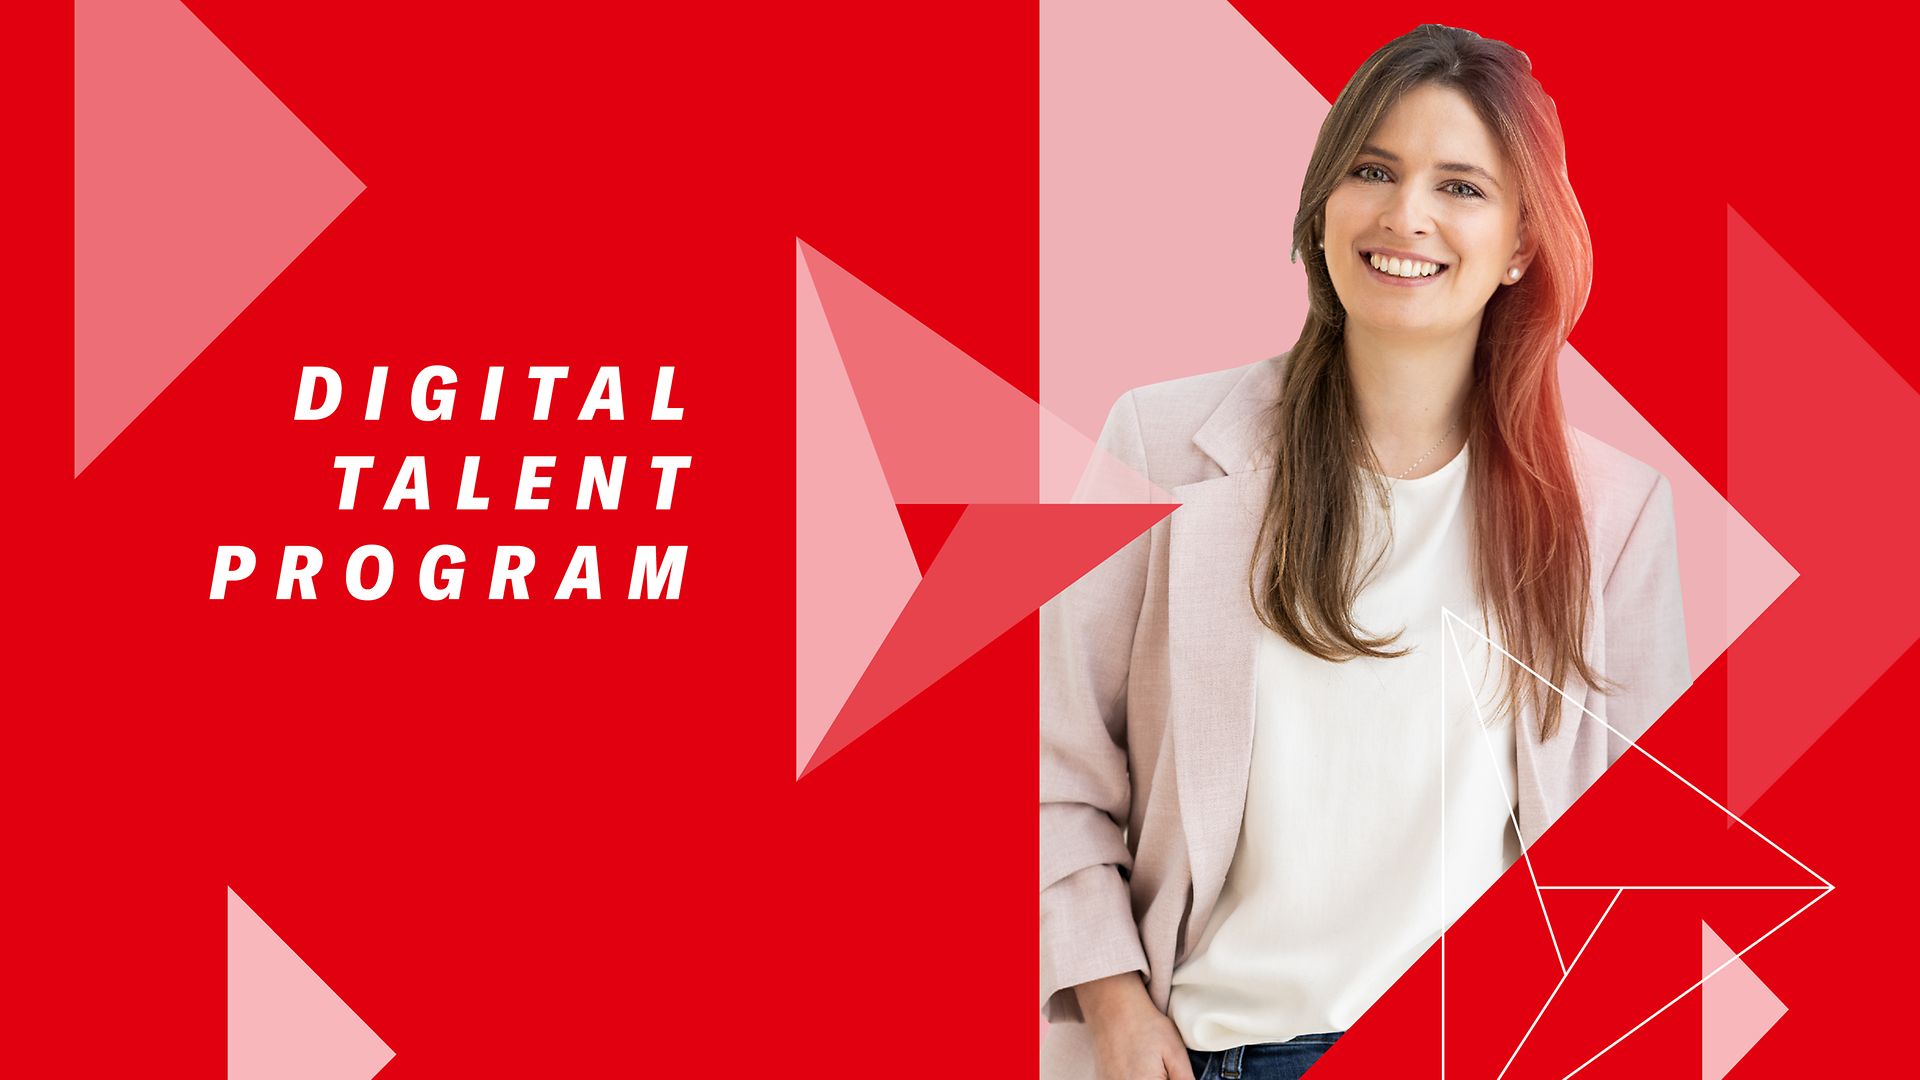 Henkel invites young professionals to become driving forces in the company’s digital transformation. 